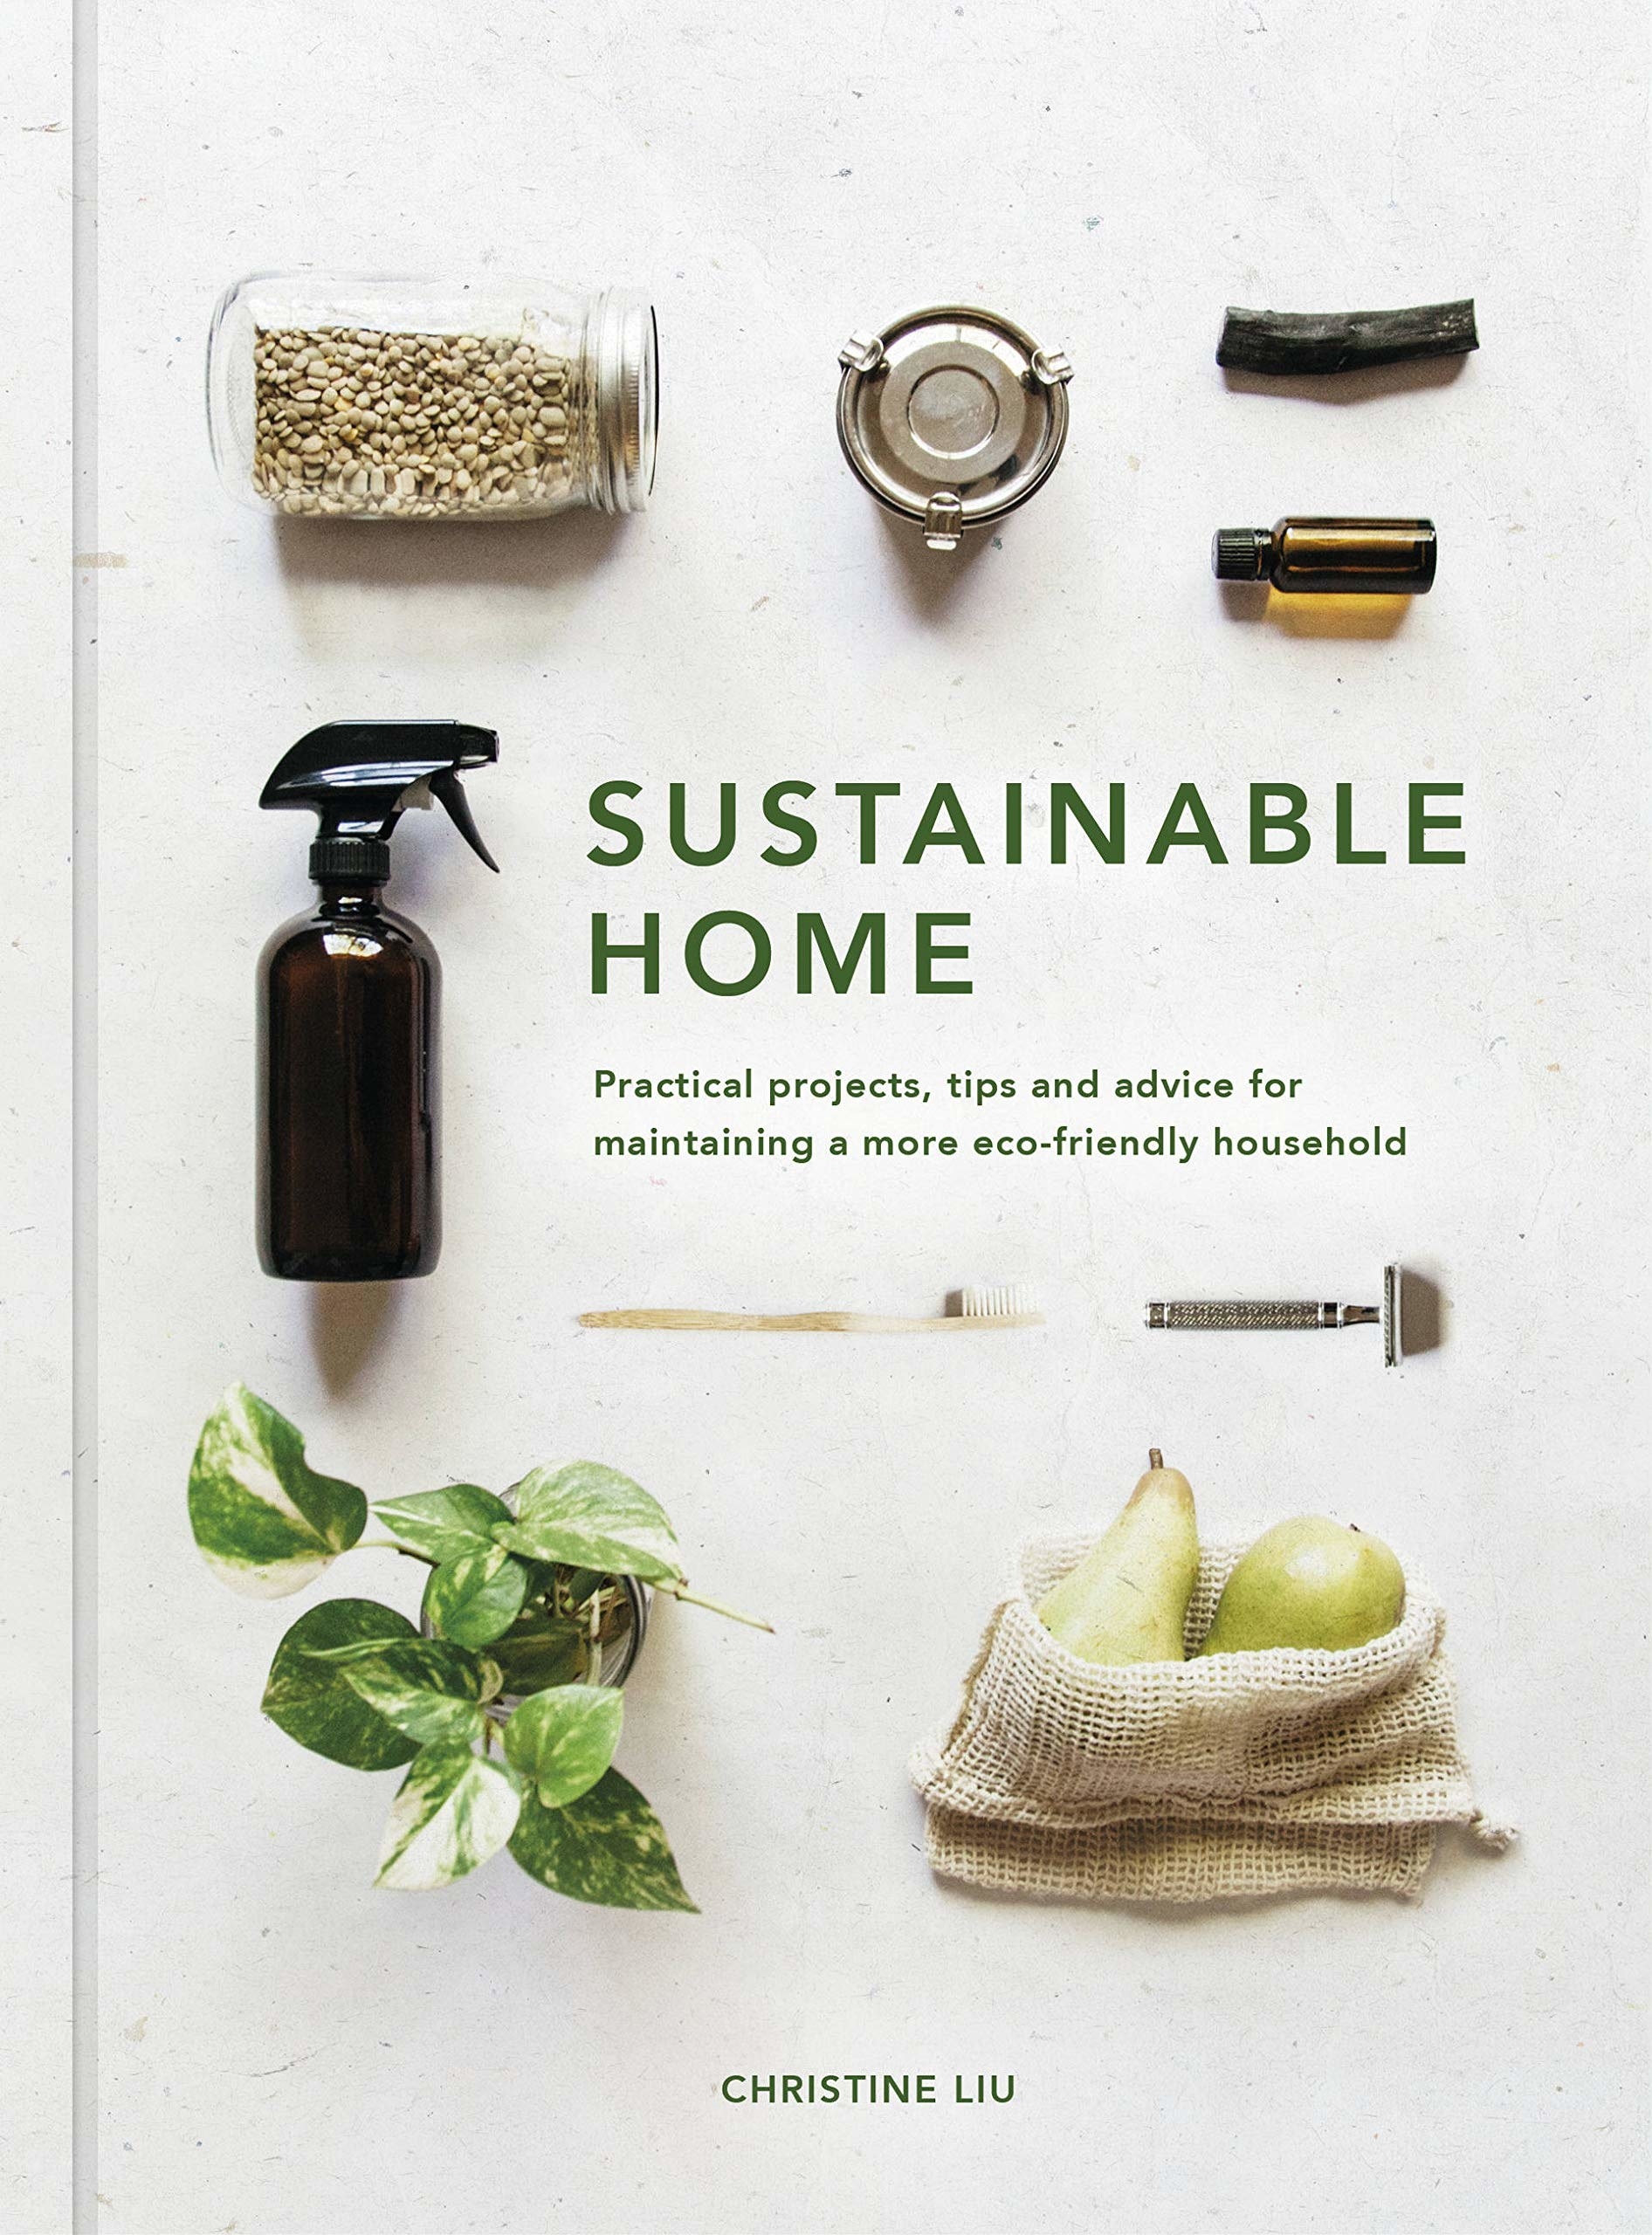 The cover of &quot;Sustainable Home&quot; by Christine Liu